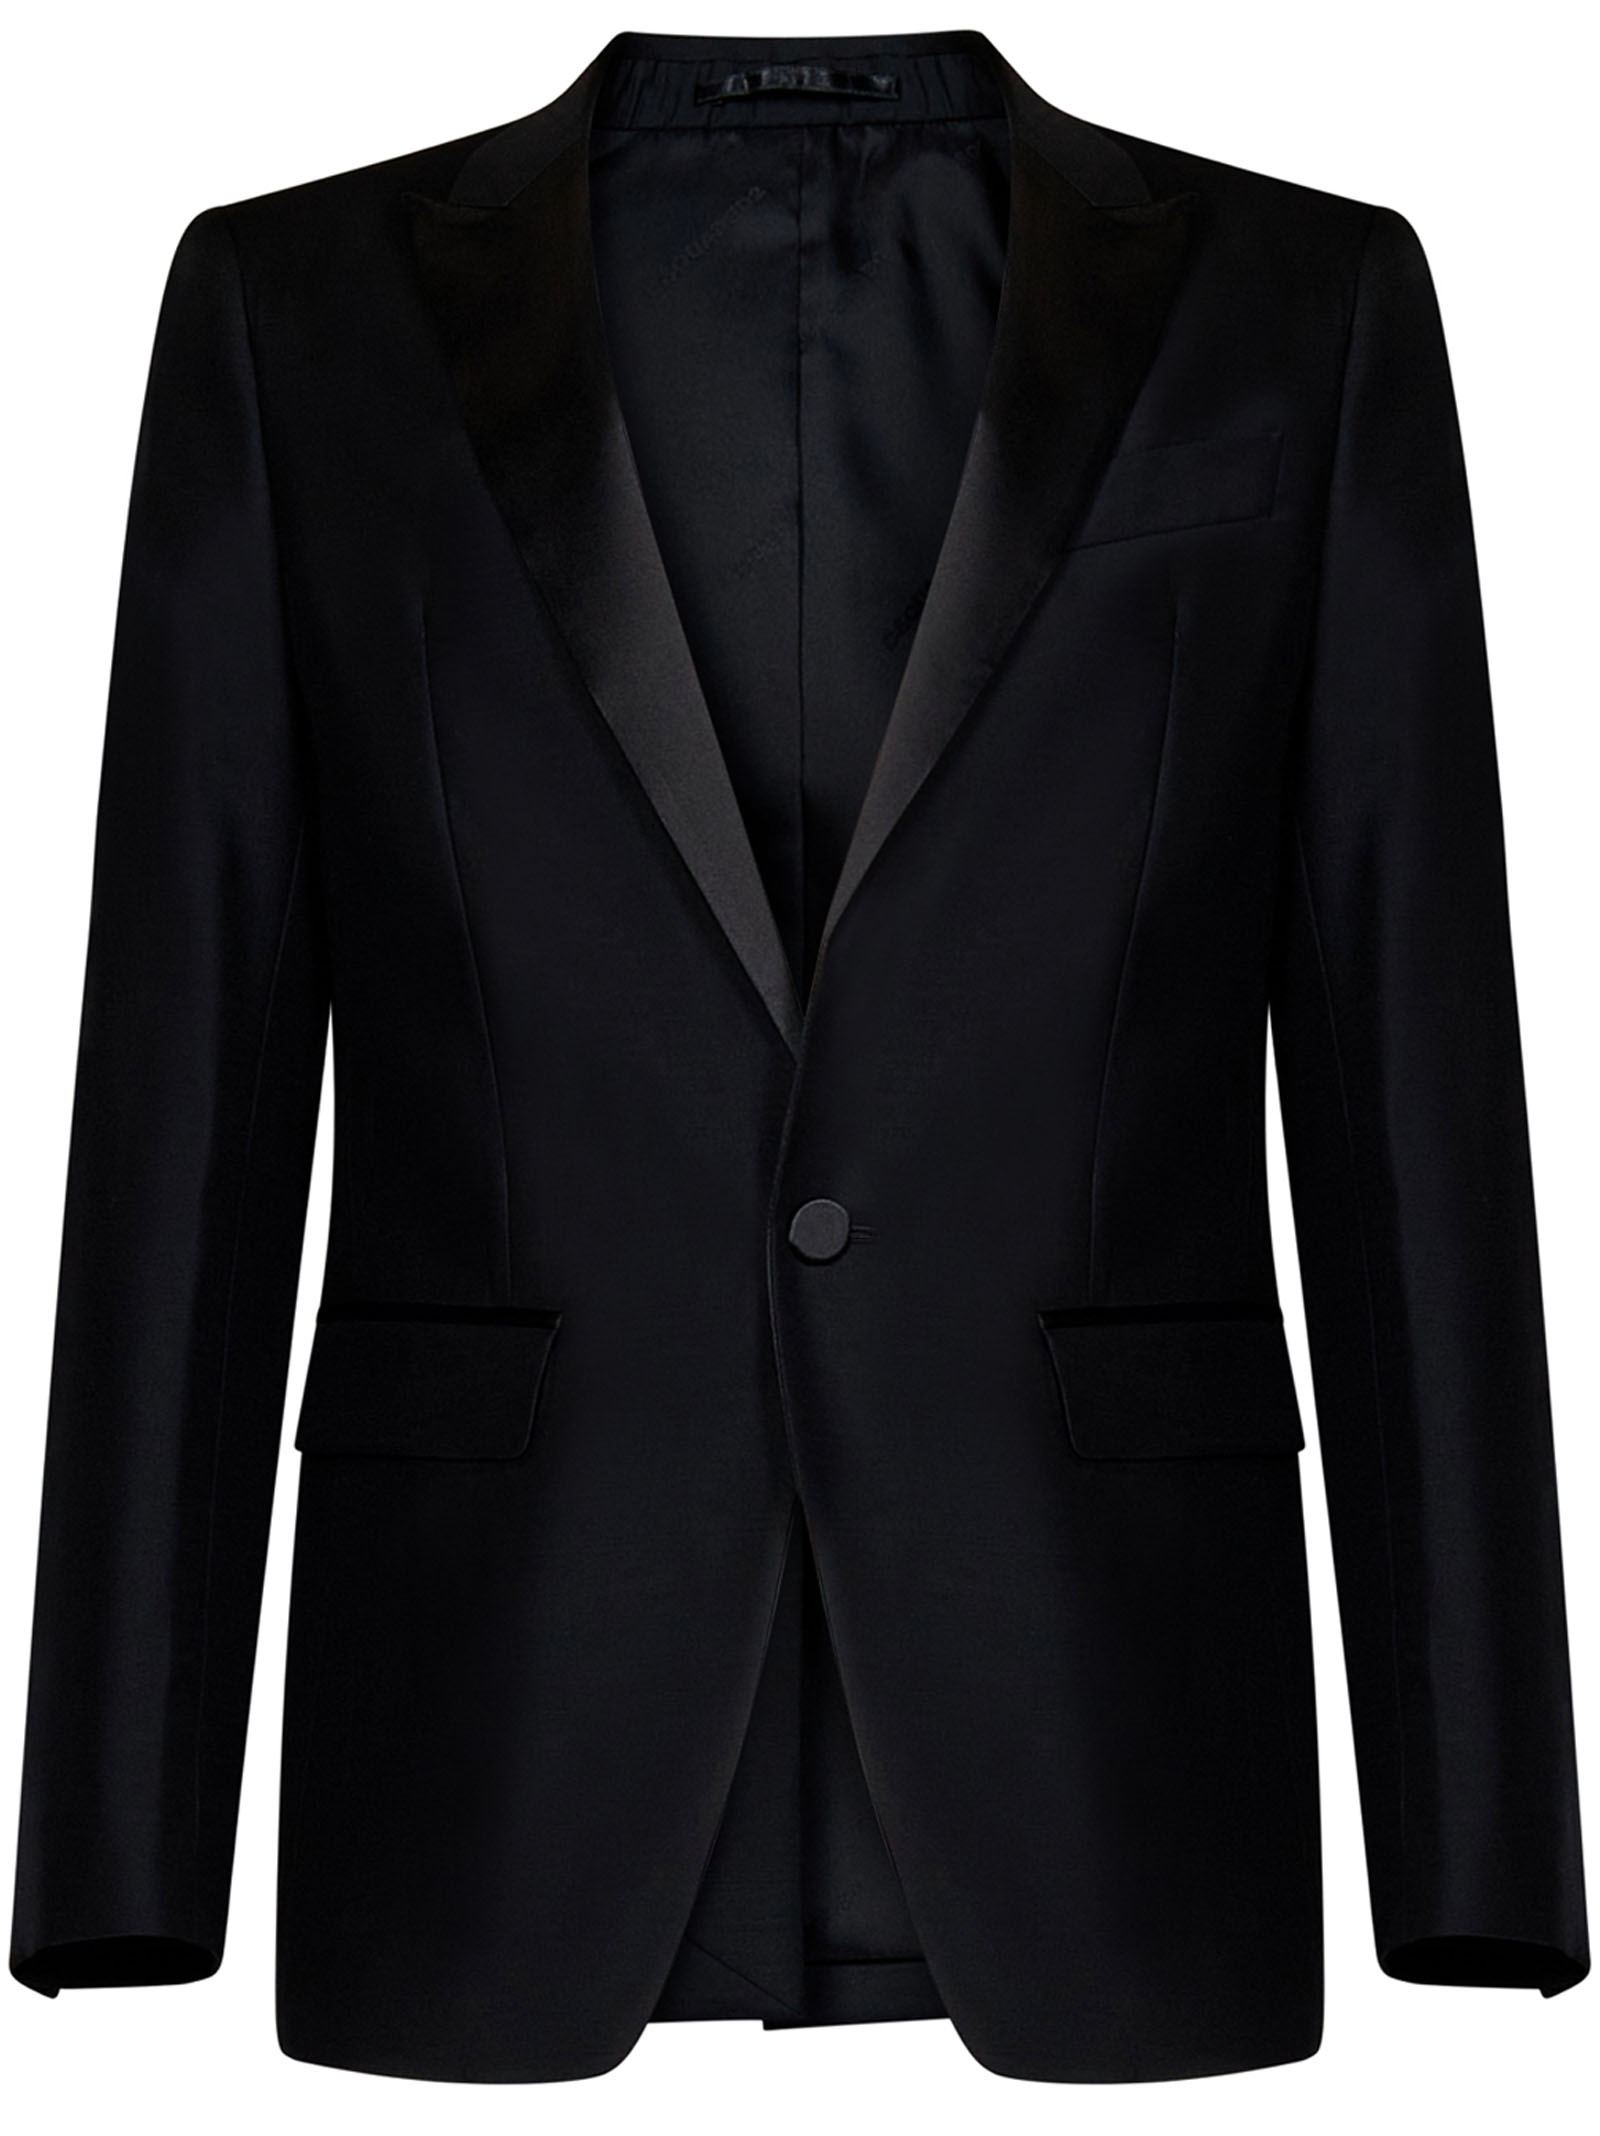 Black virgin wool and silk tuxedo suit with single-breasted blazer with silk satin lapels. - 3